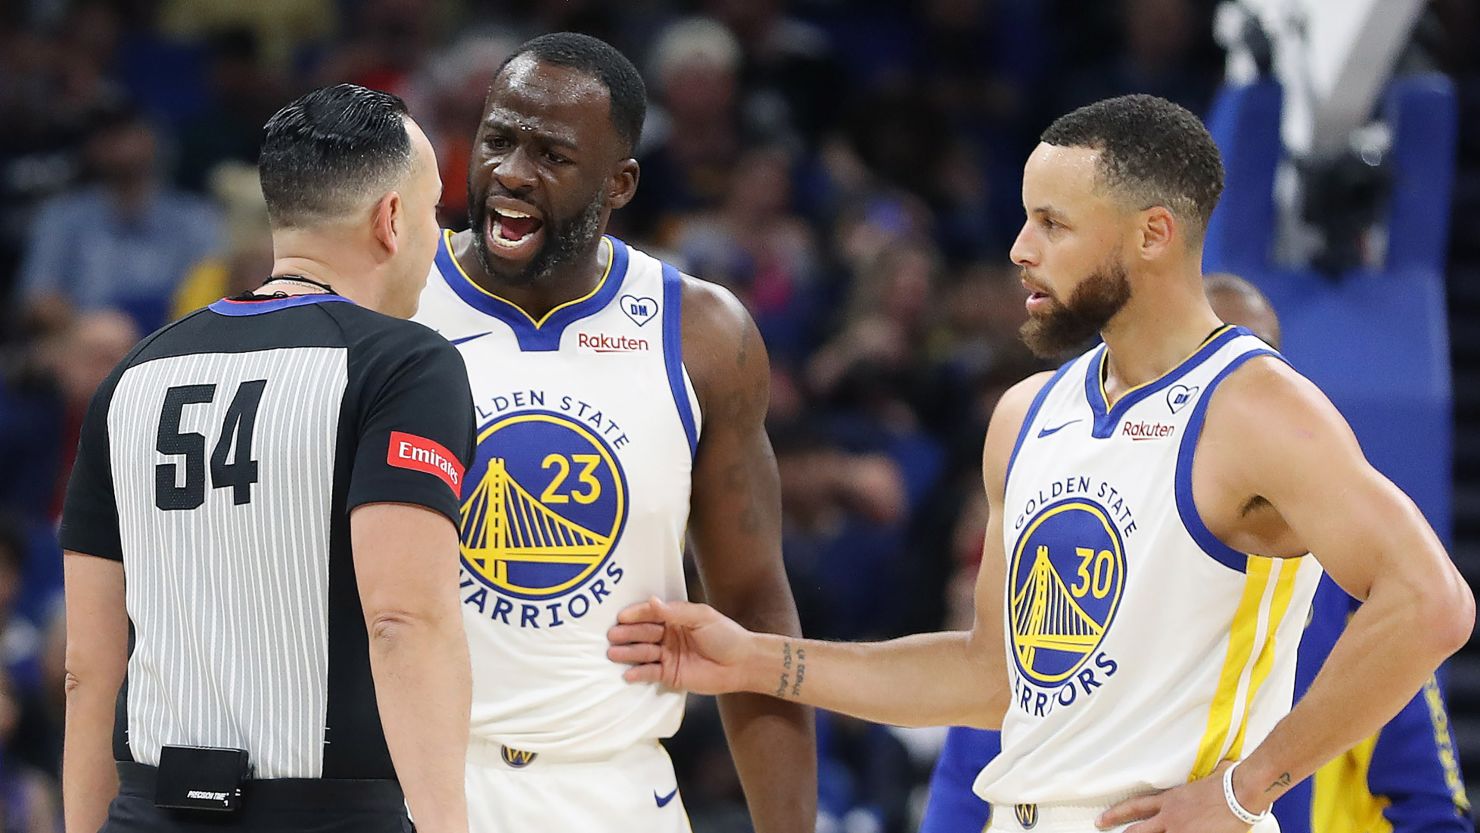 Draymond Green received his fourth ejection of the season.